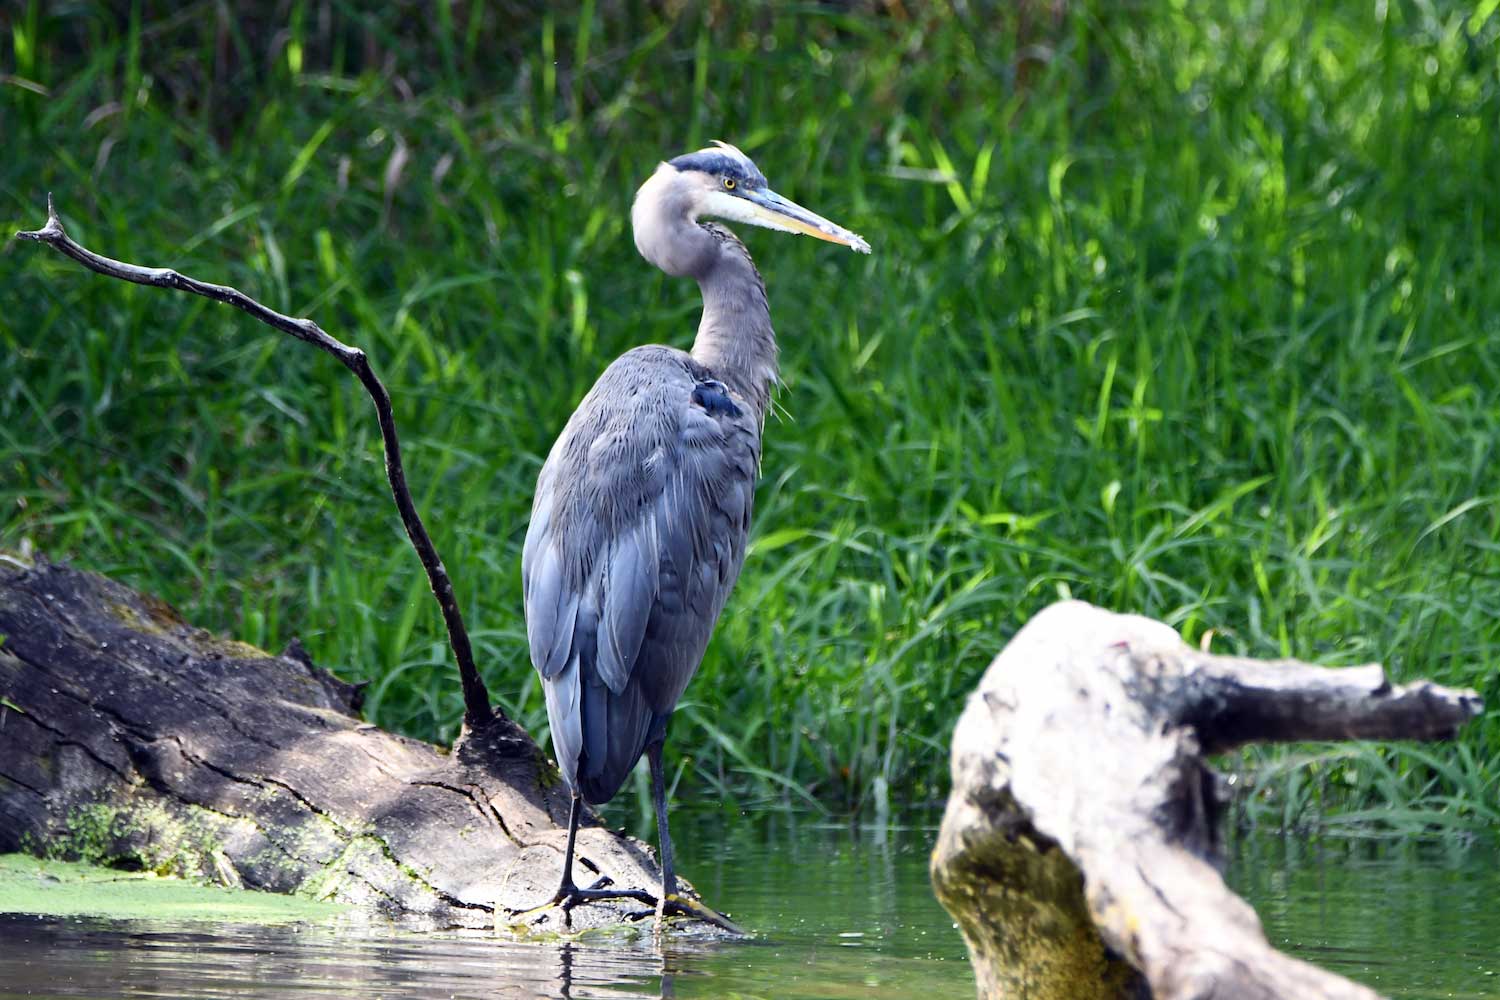 A great blue heron standing in shallow water.